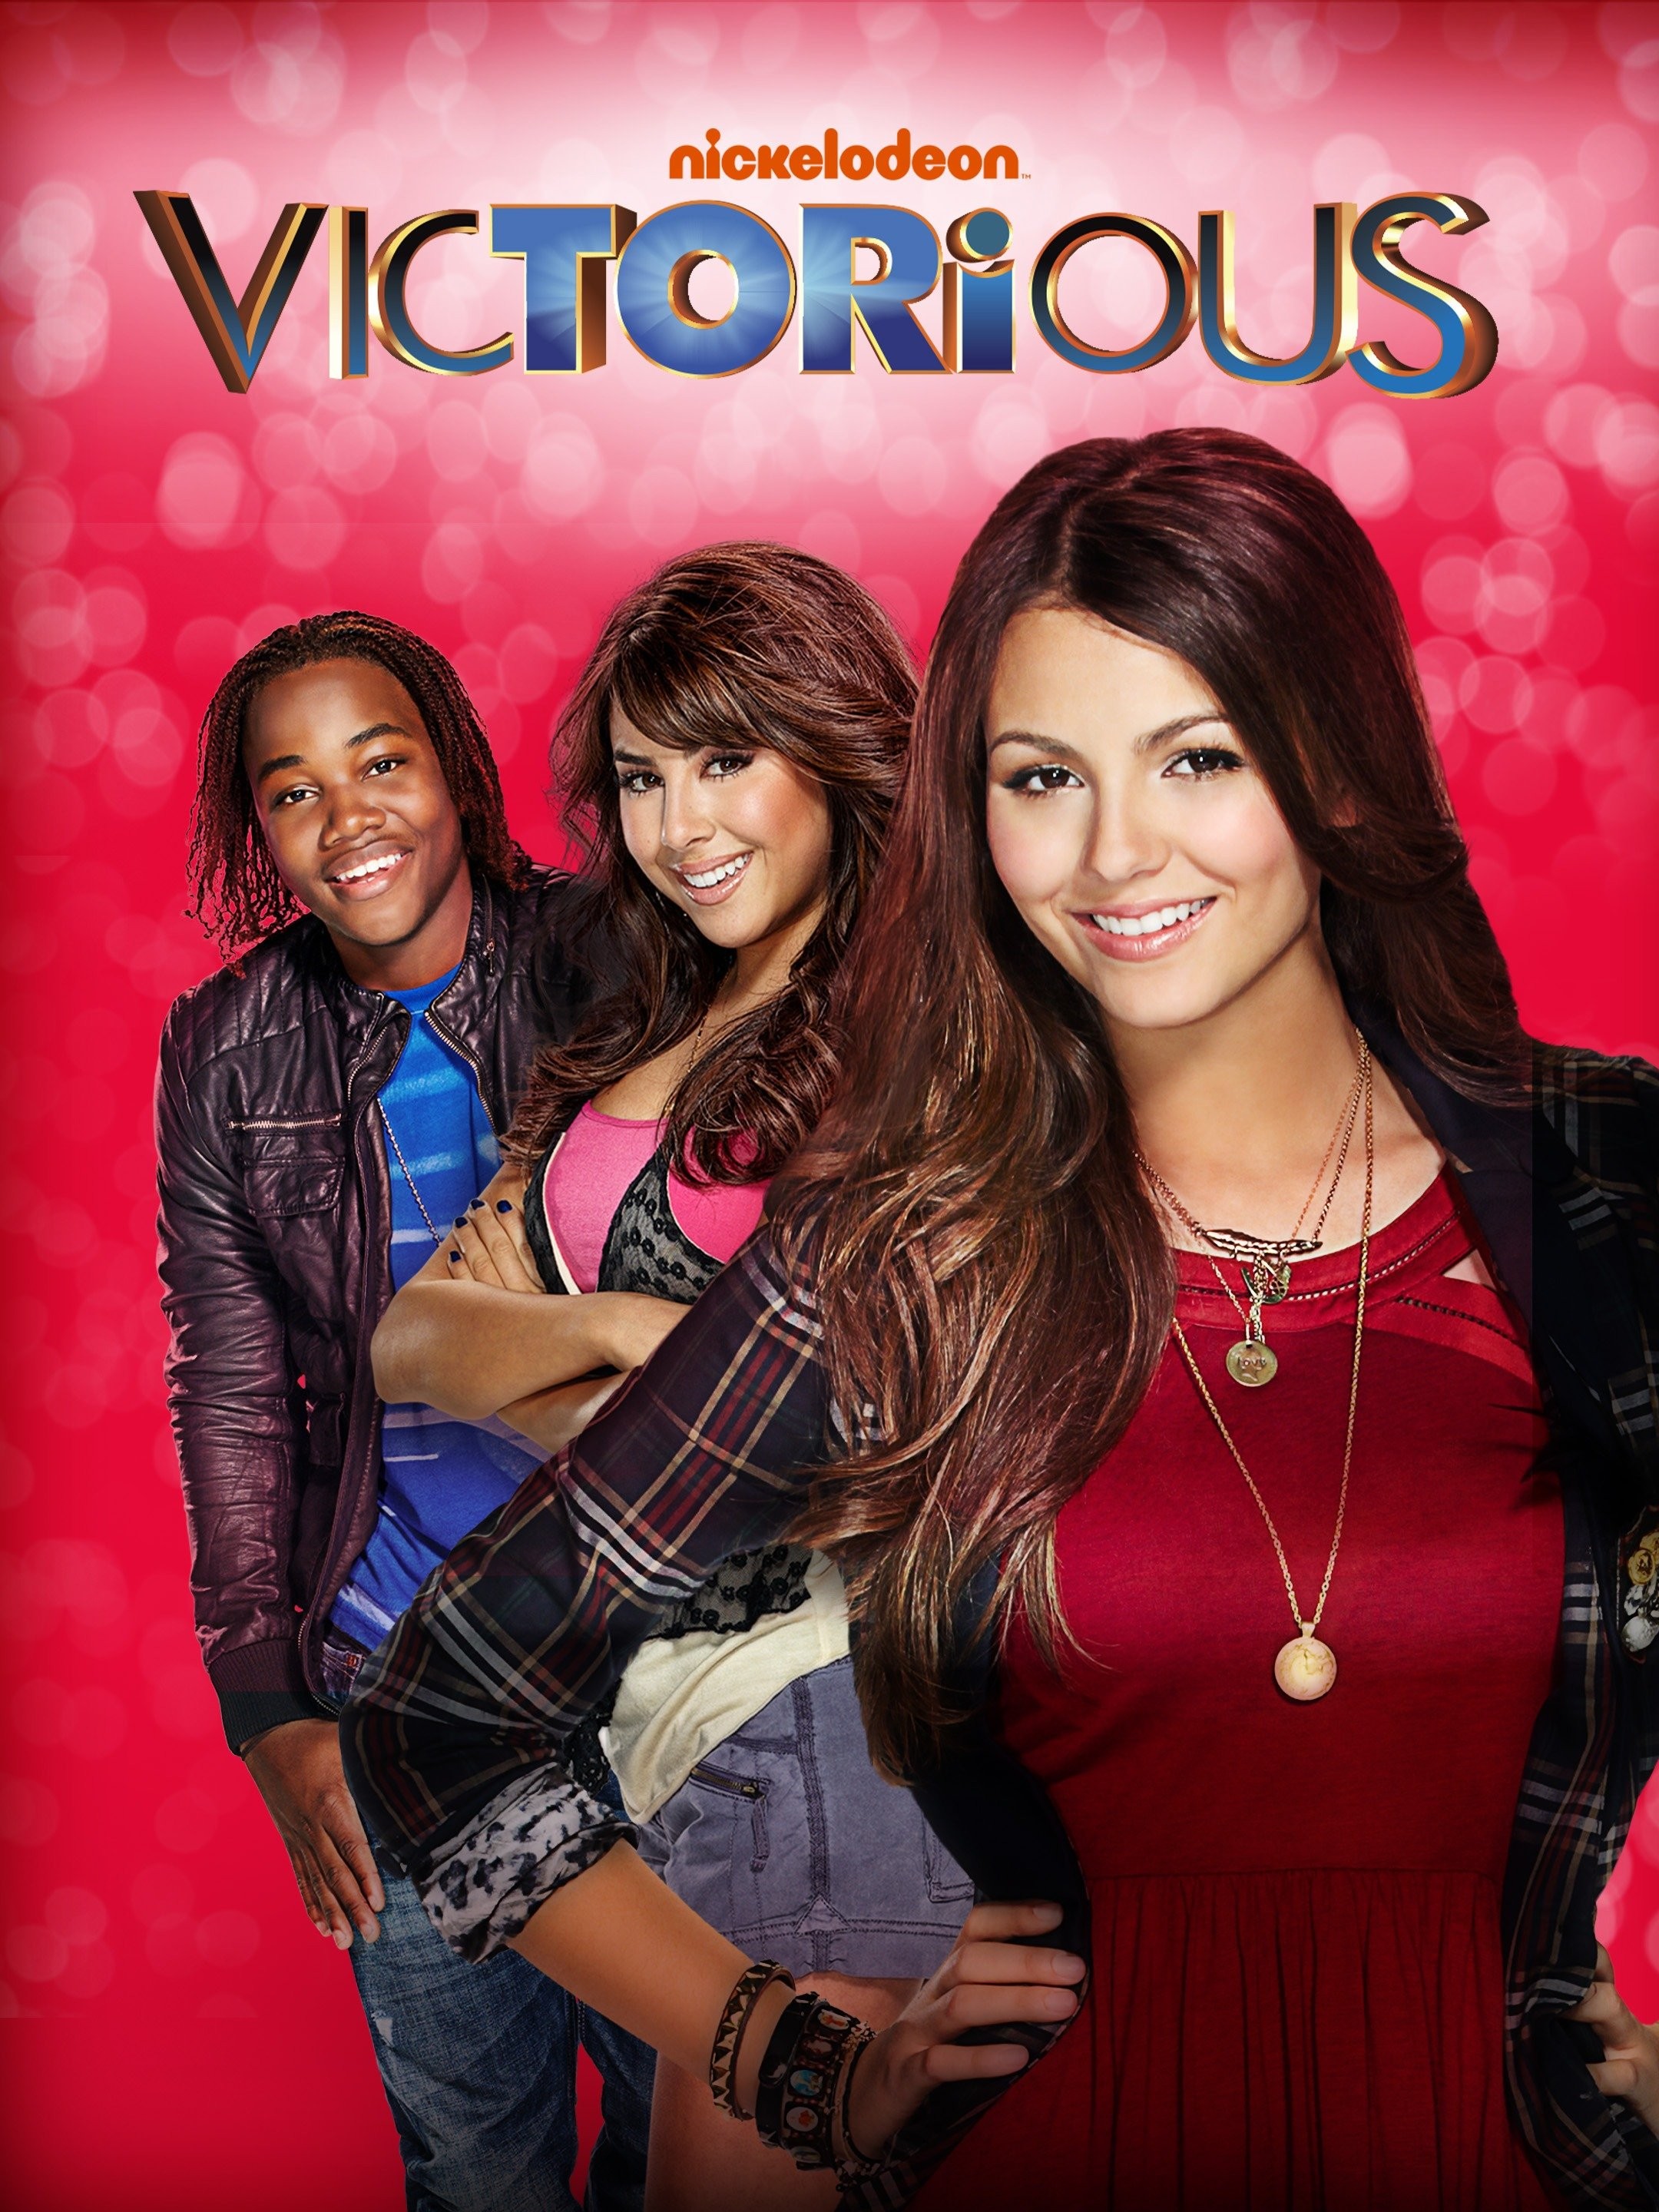 The high-gloss red of Tori Vega (Victoria Justice) in Victorious